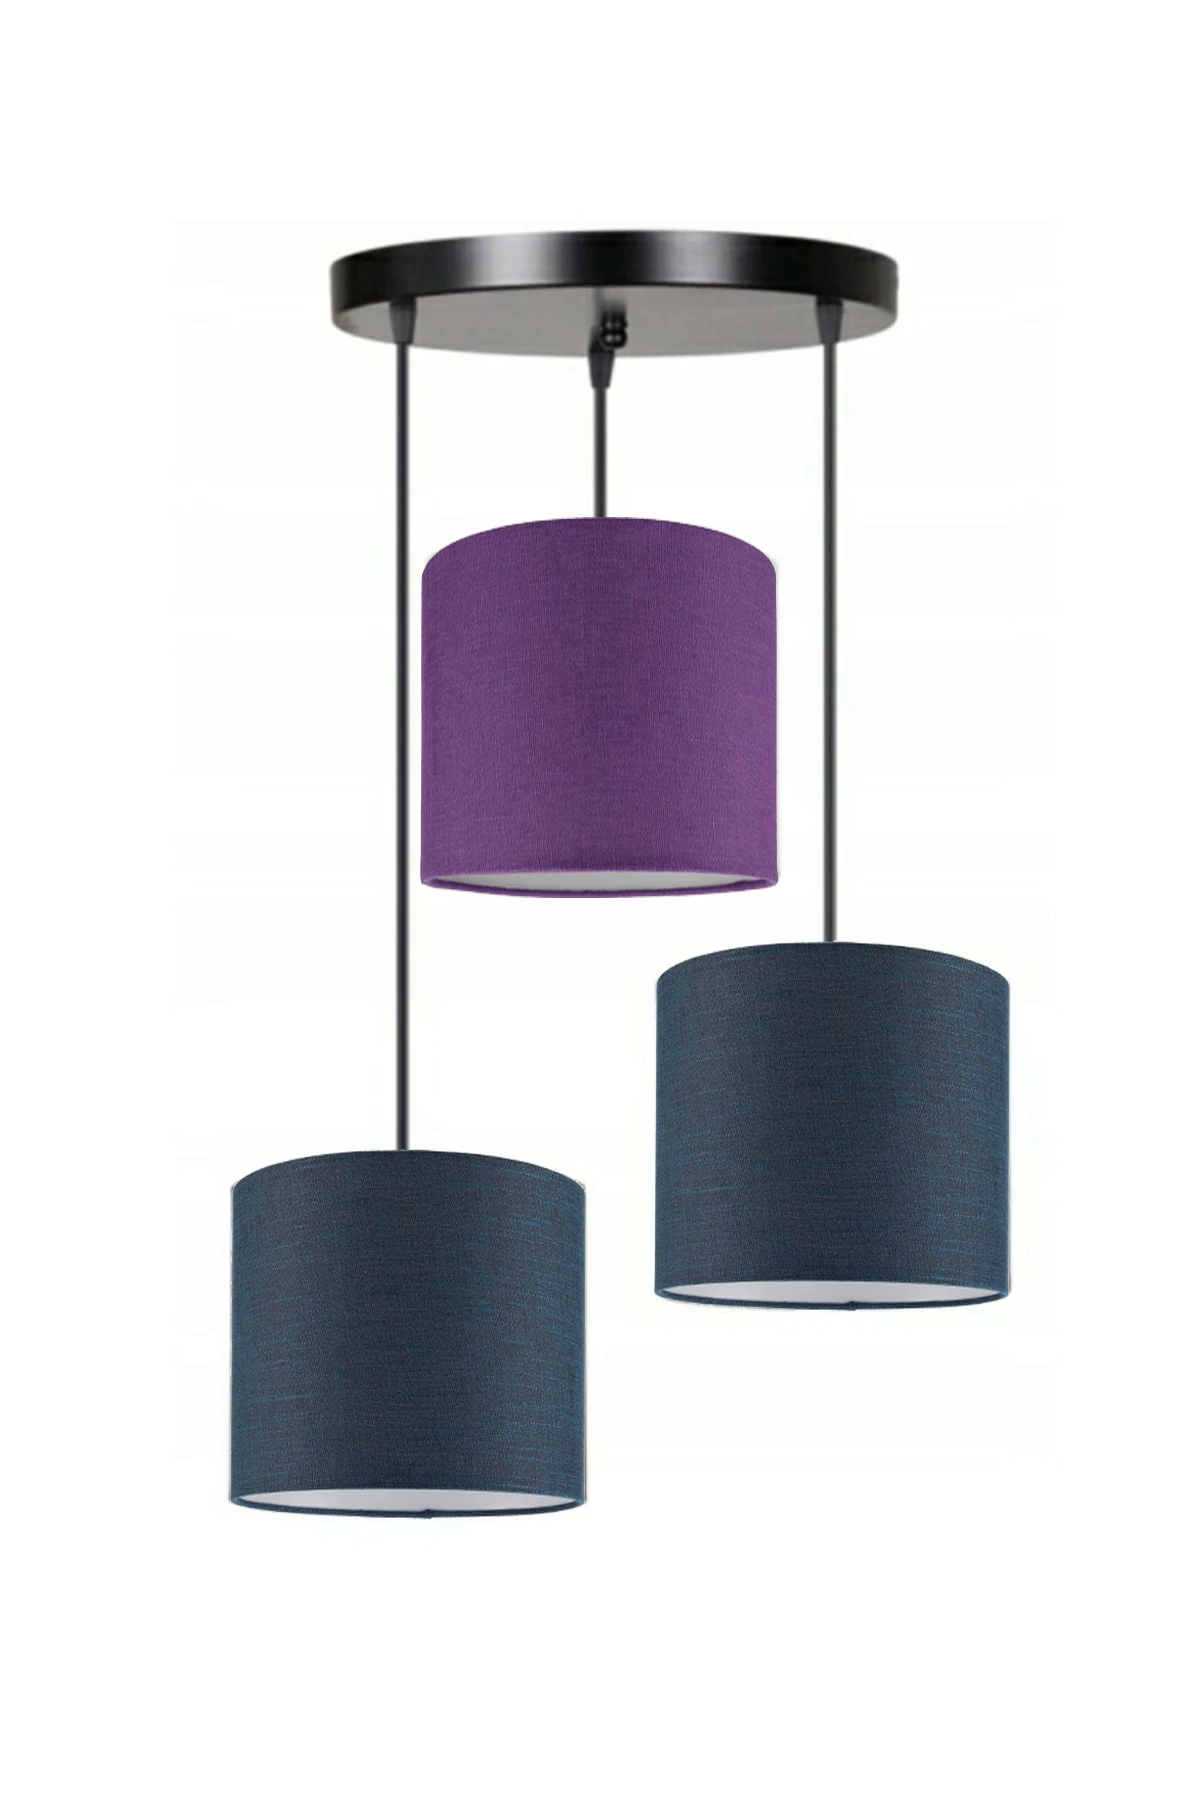 3 Heads 2 Navy Blue 1 Purple Cylinder Fabric Lampshade Pendant Lamp Chandelier Modern Decorative Design For Home Hotel Office